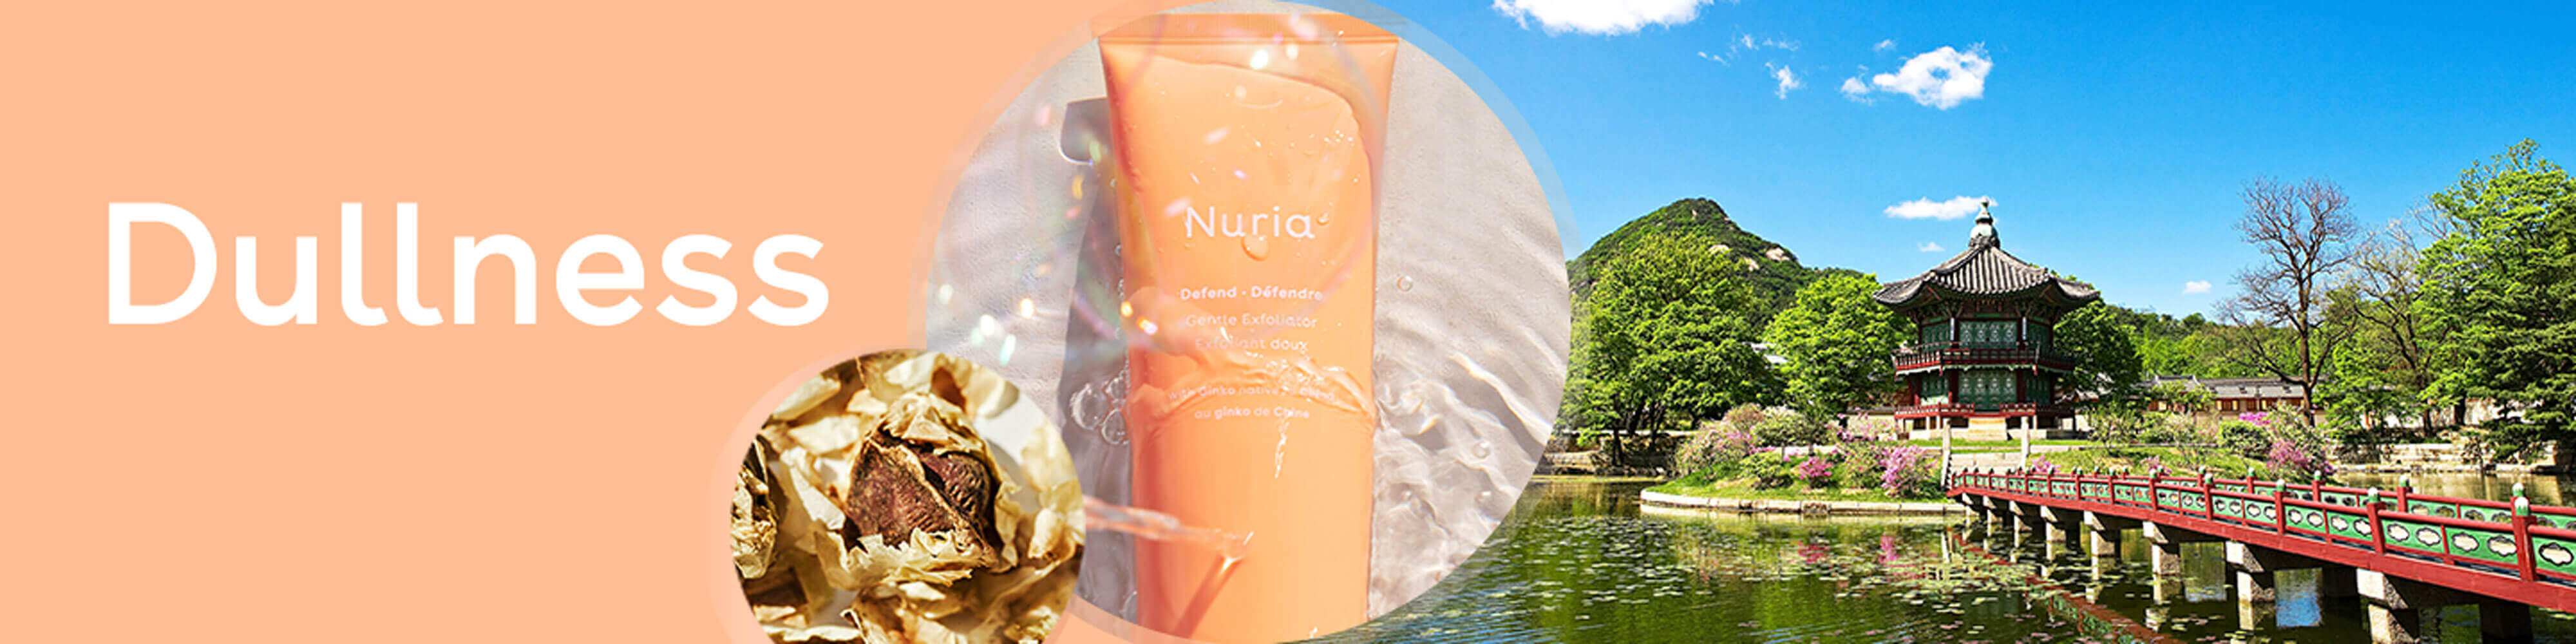 Dullness - Nuria's products for your skin concerns